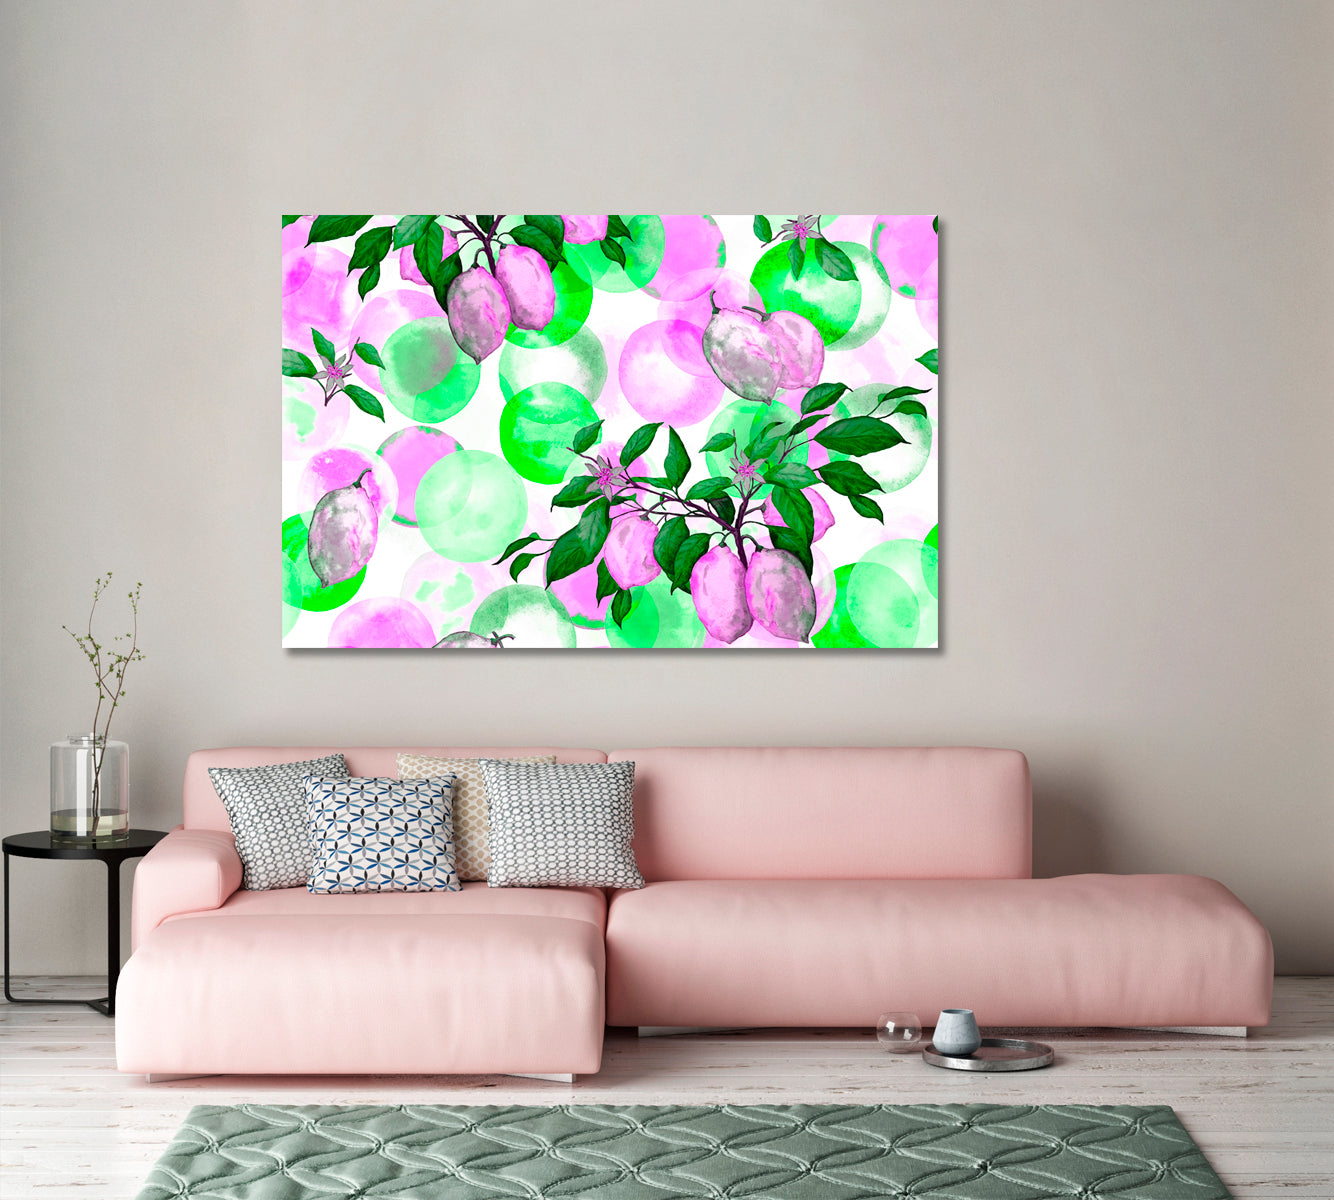 Abstract Ripe Lemons With Green Bubbles Canvas Print-Canvas Print-CetArt-1 Panel-24x16 inches-CetArt